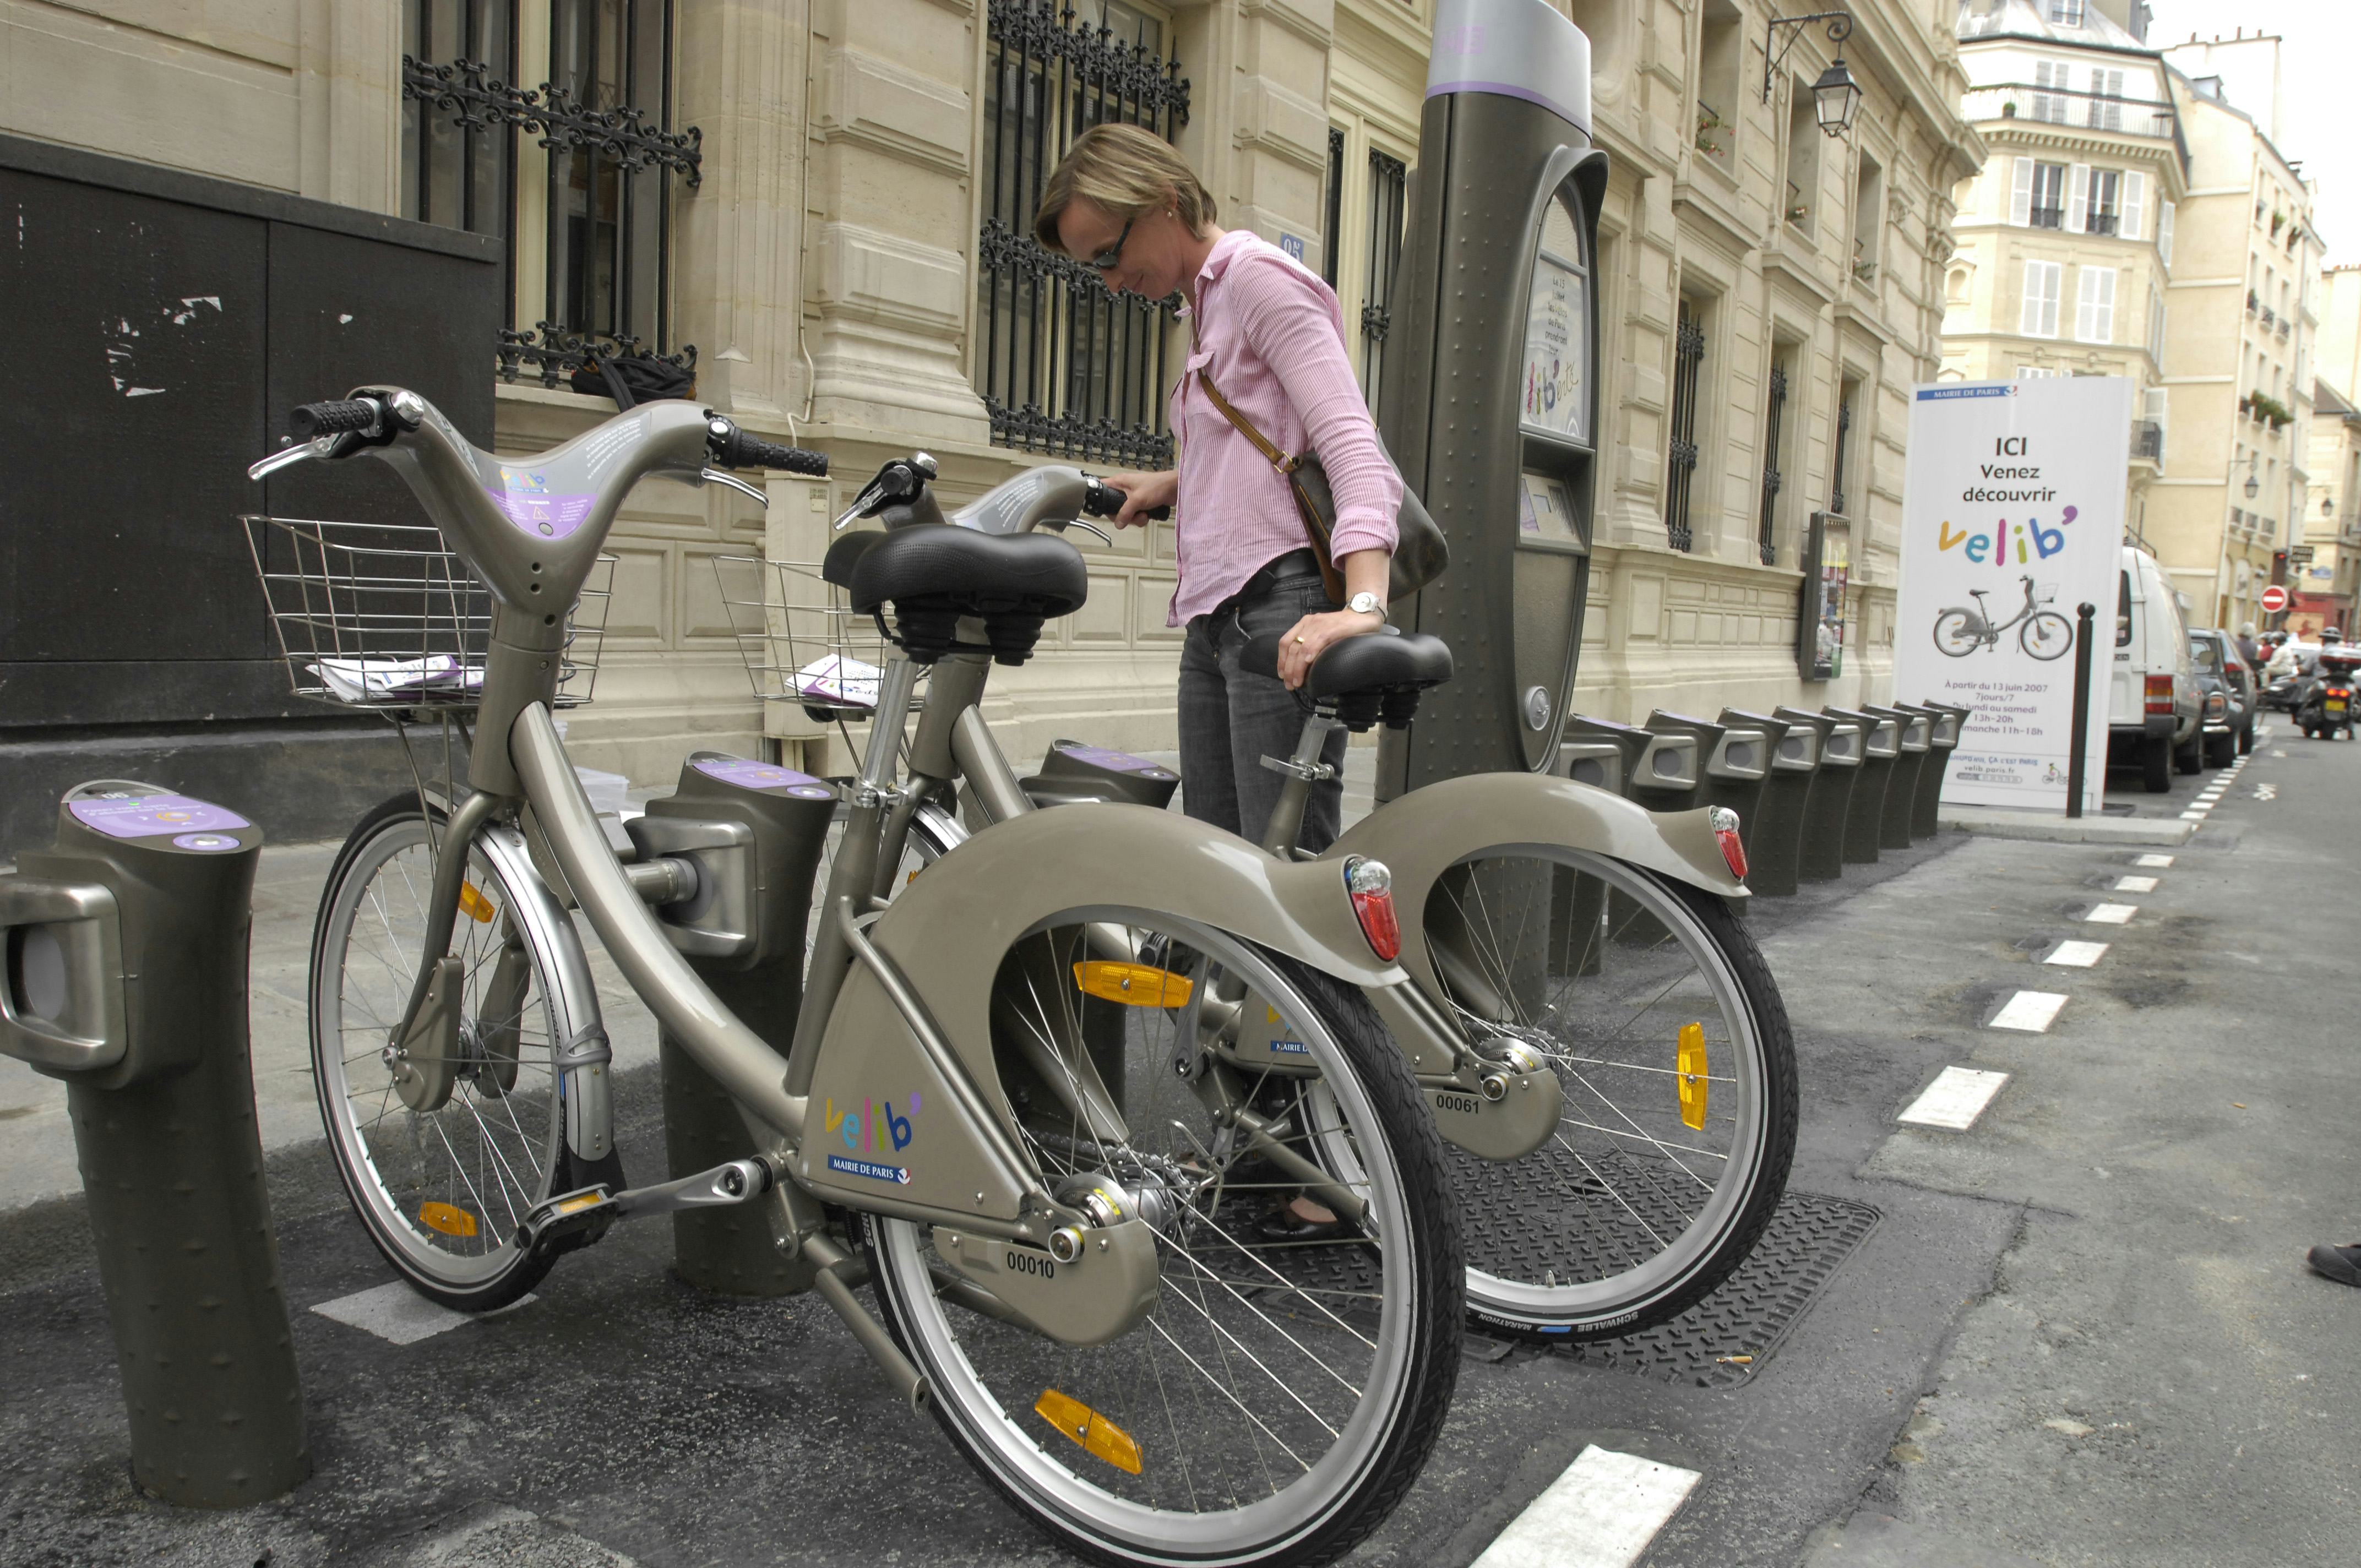 Vélibs are very common in Paris’ streets. That’s to change in 2017-2018. – Photo Bike Europe